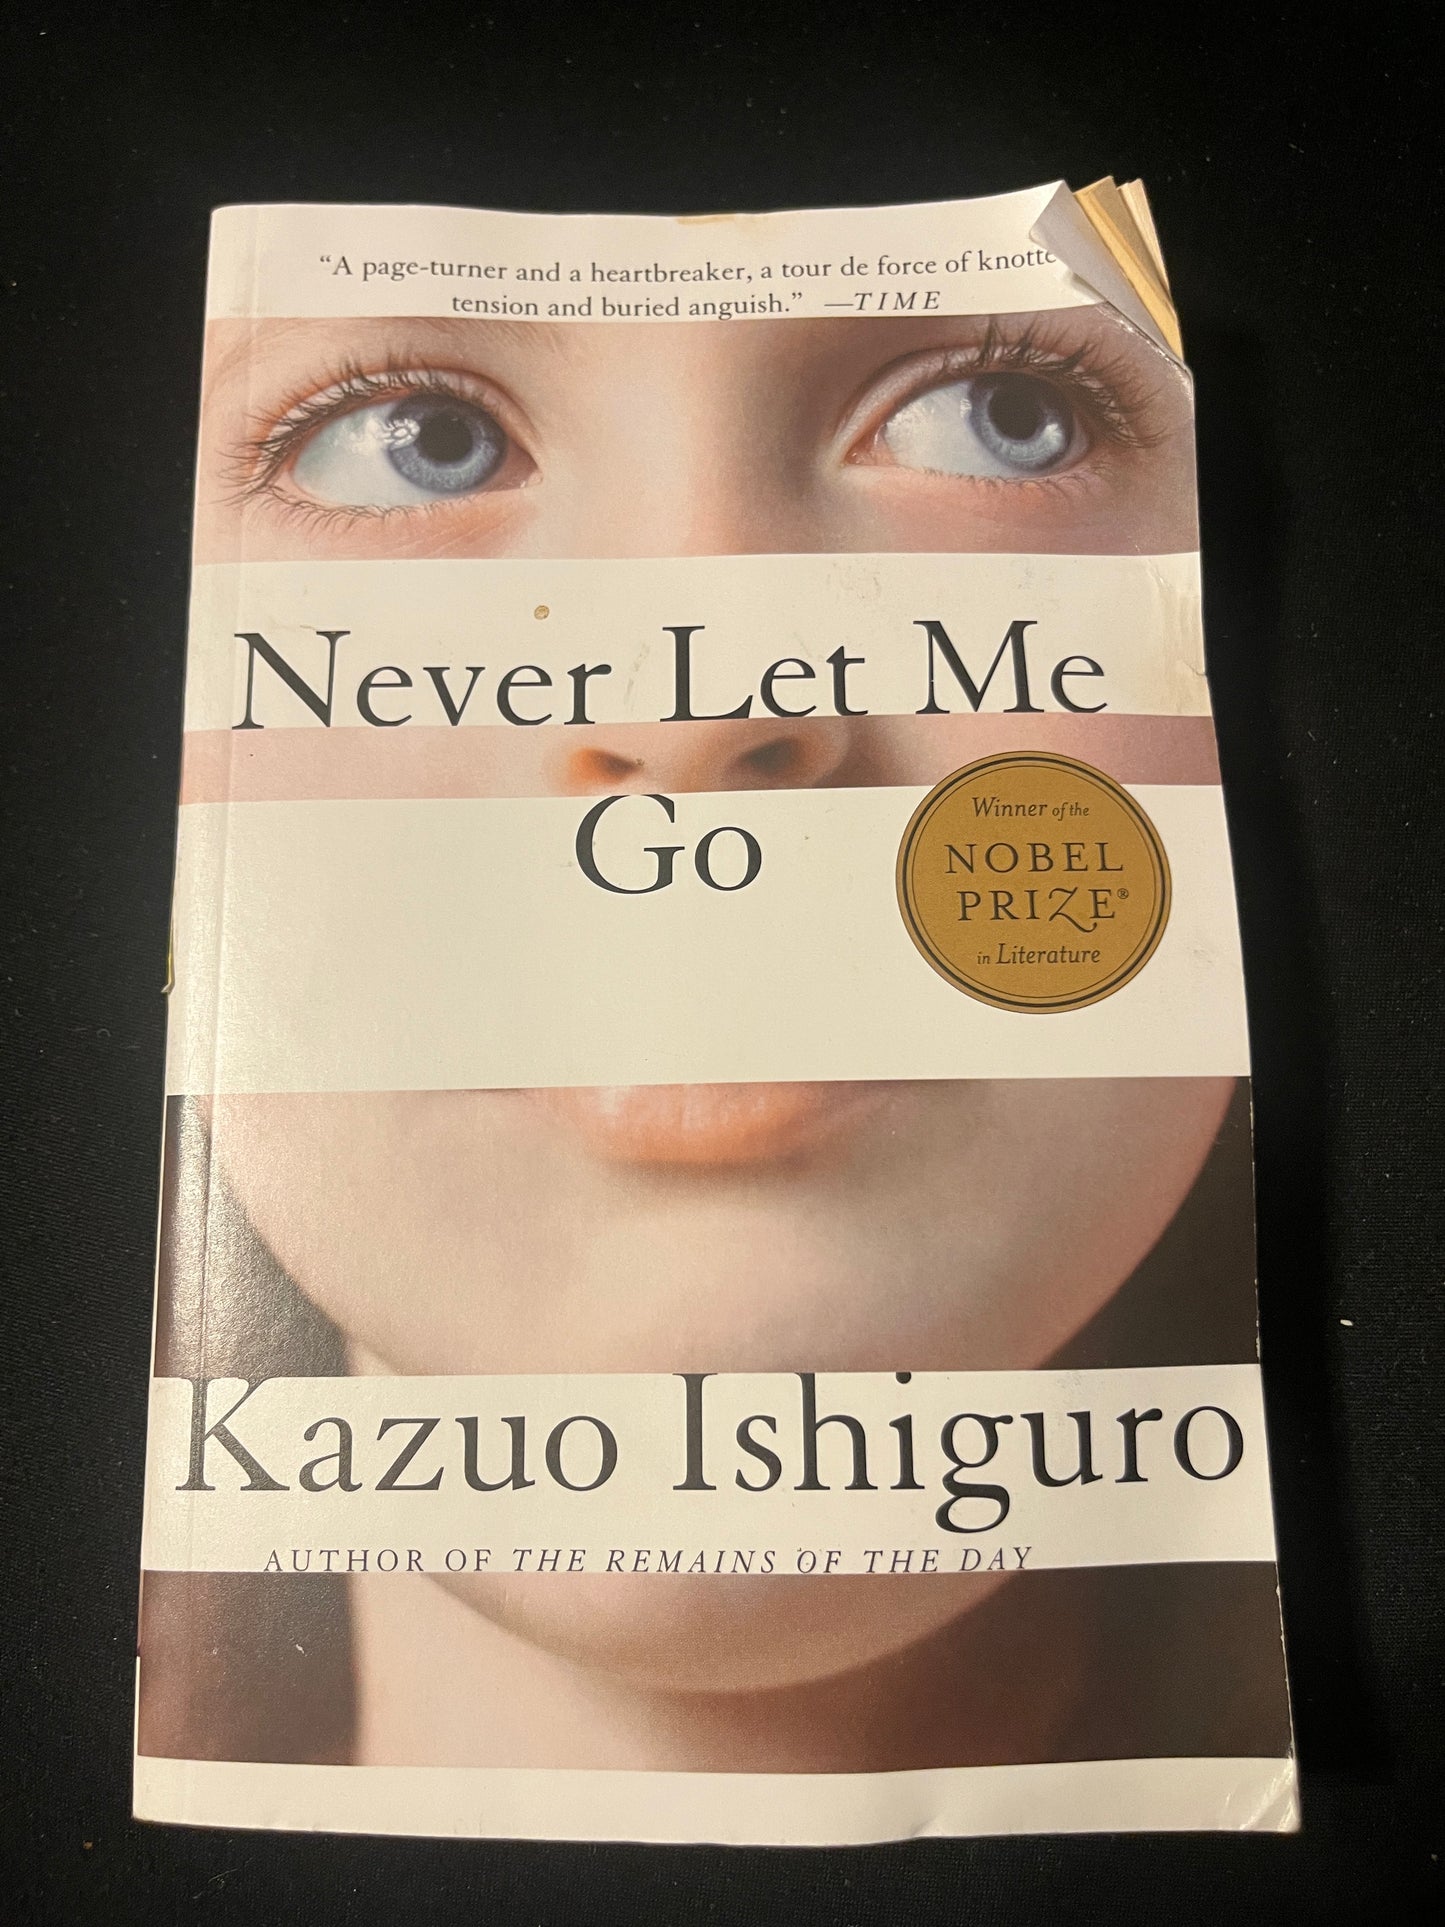 NEVER LET ME GO by Kazuo Ishiguro